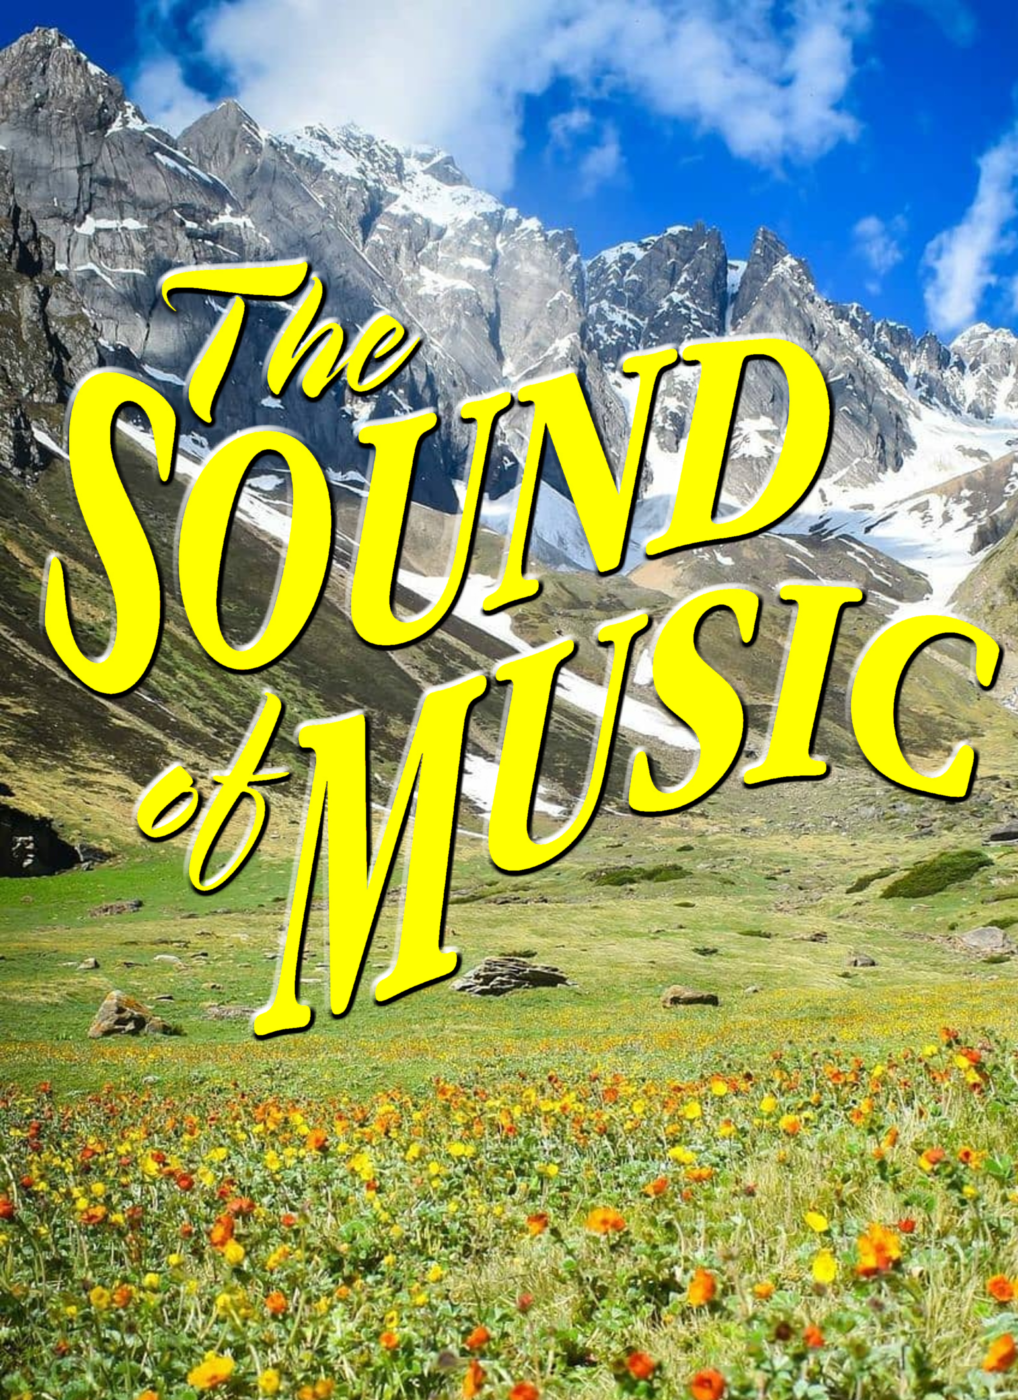 The Sound of Music logo